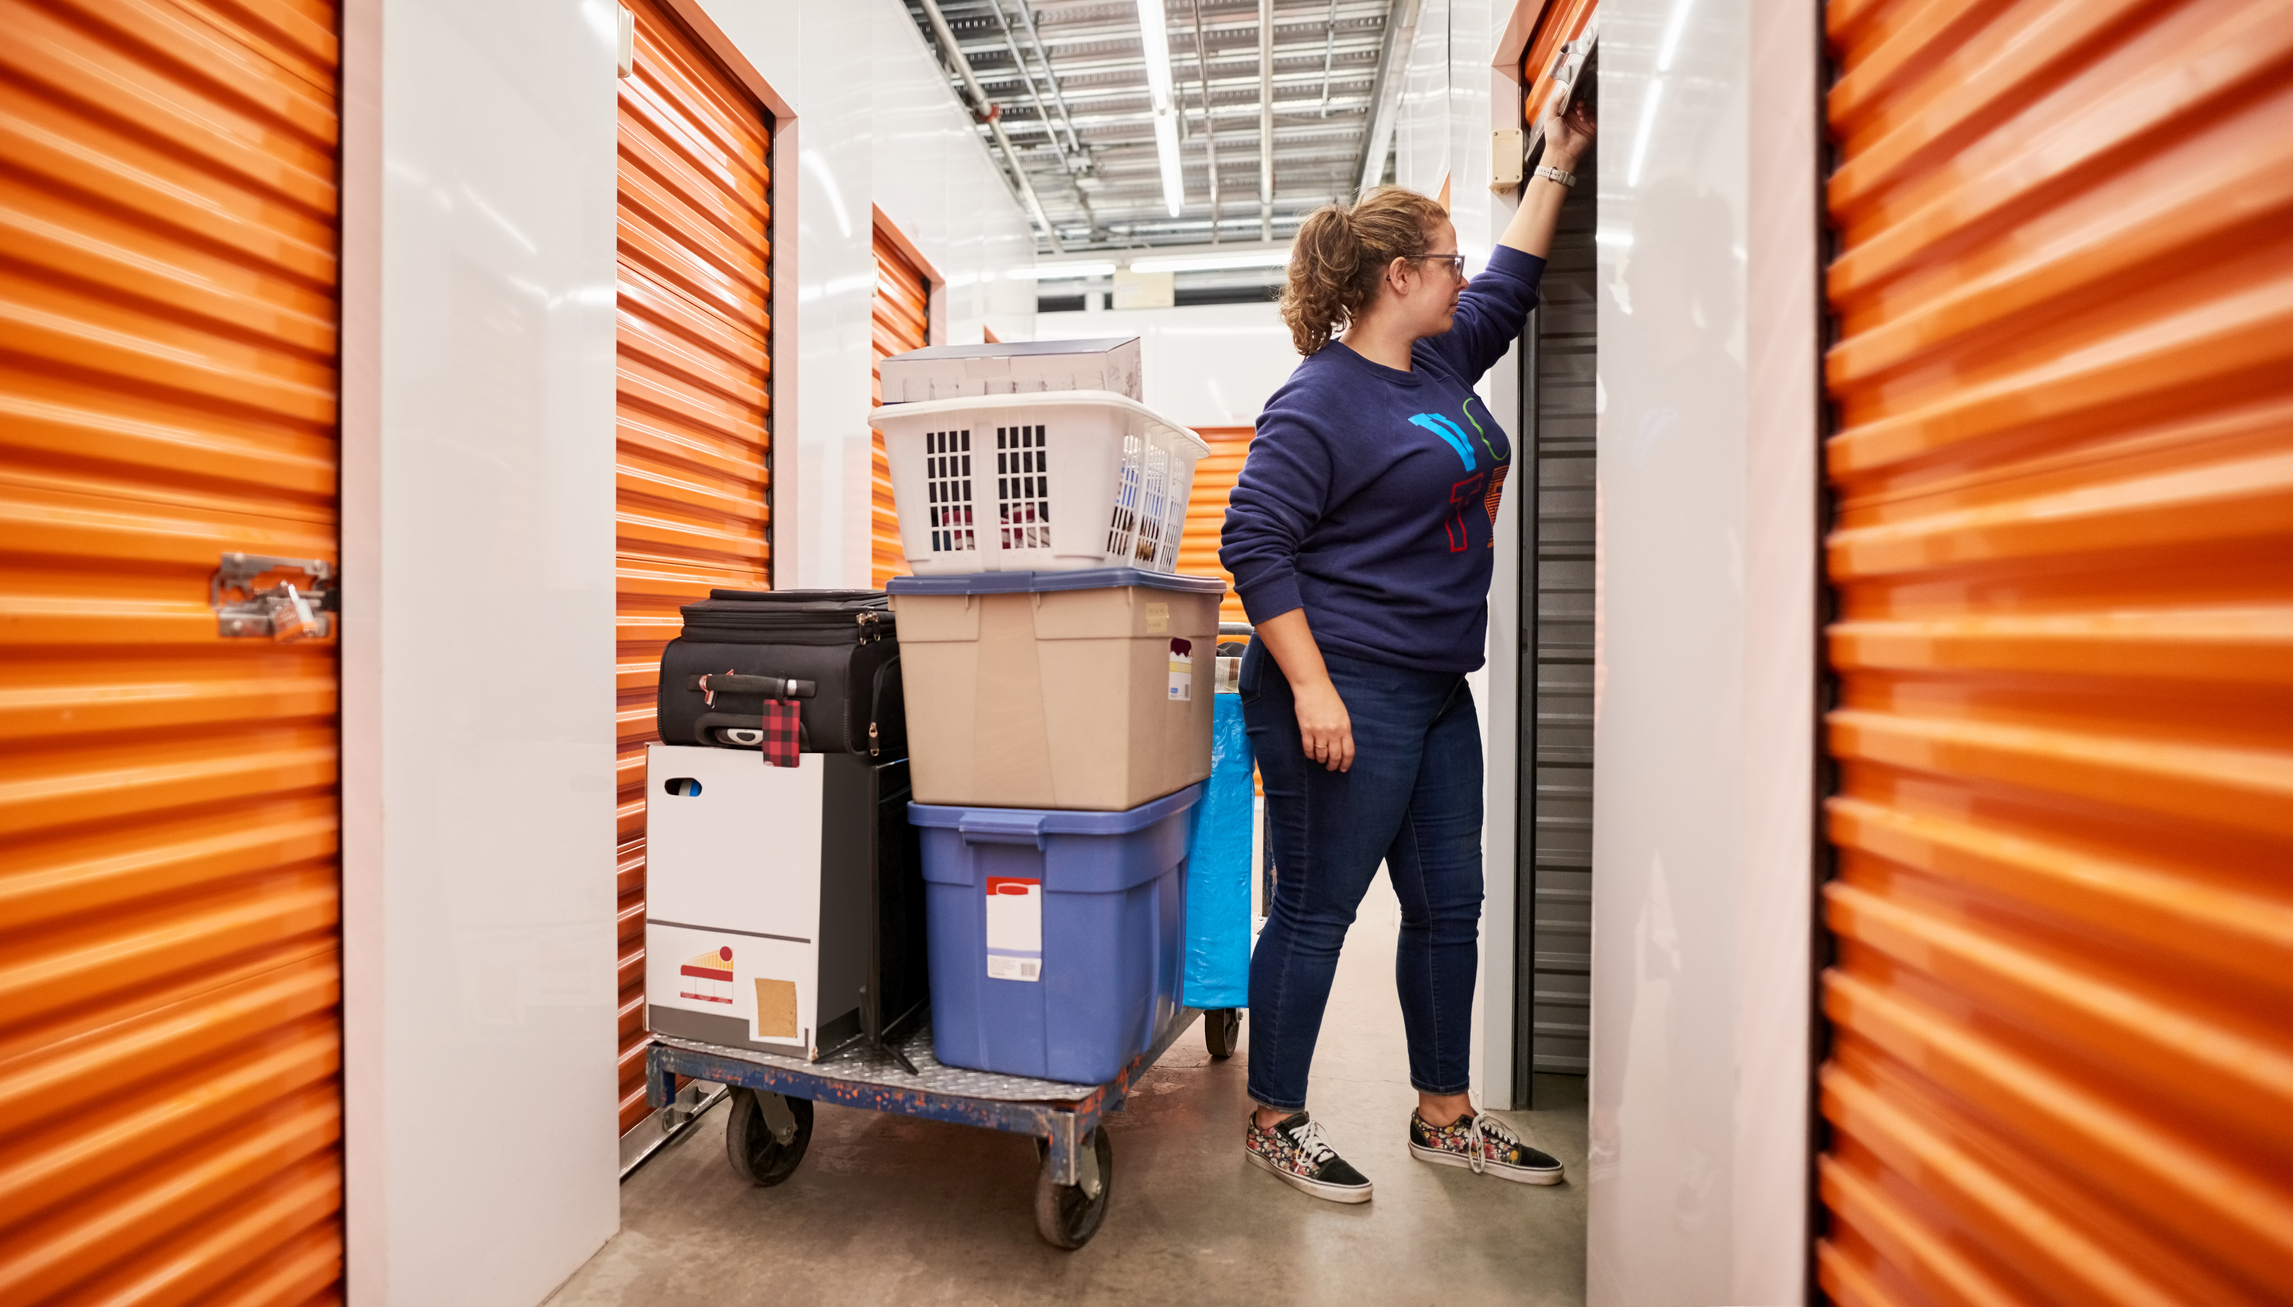 long term storage solutions - Woman opening the shutter of a self storage unit with a trolley full of goods and items in the aisle of self-storage building